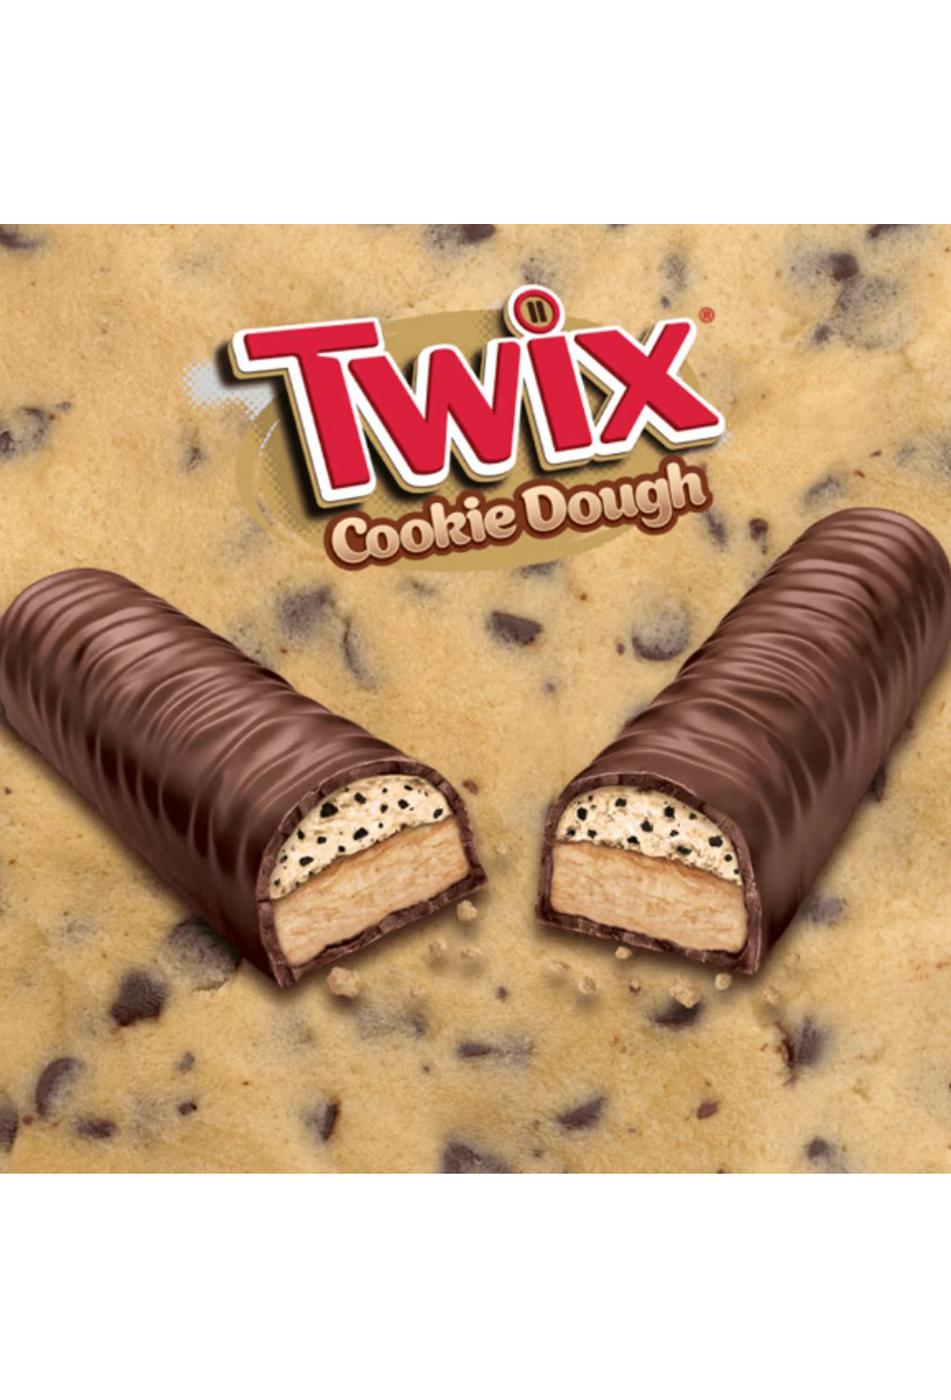 Twix Cookie Dough Full Size Candy Bar; image 2 of 2